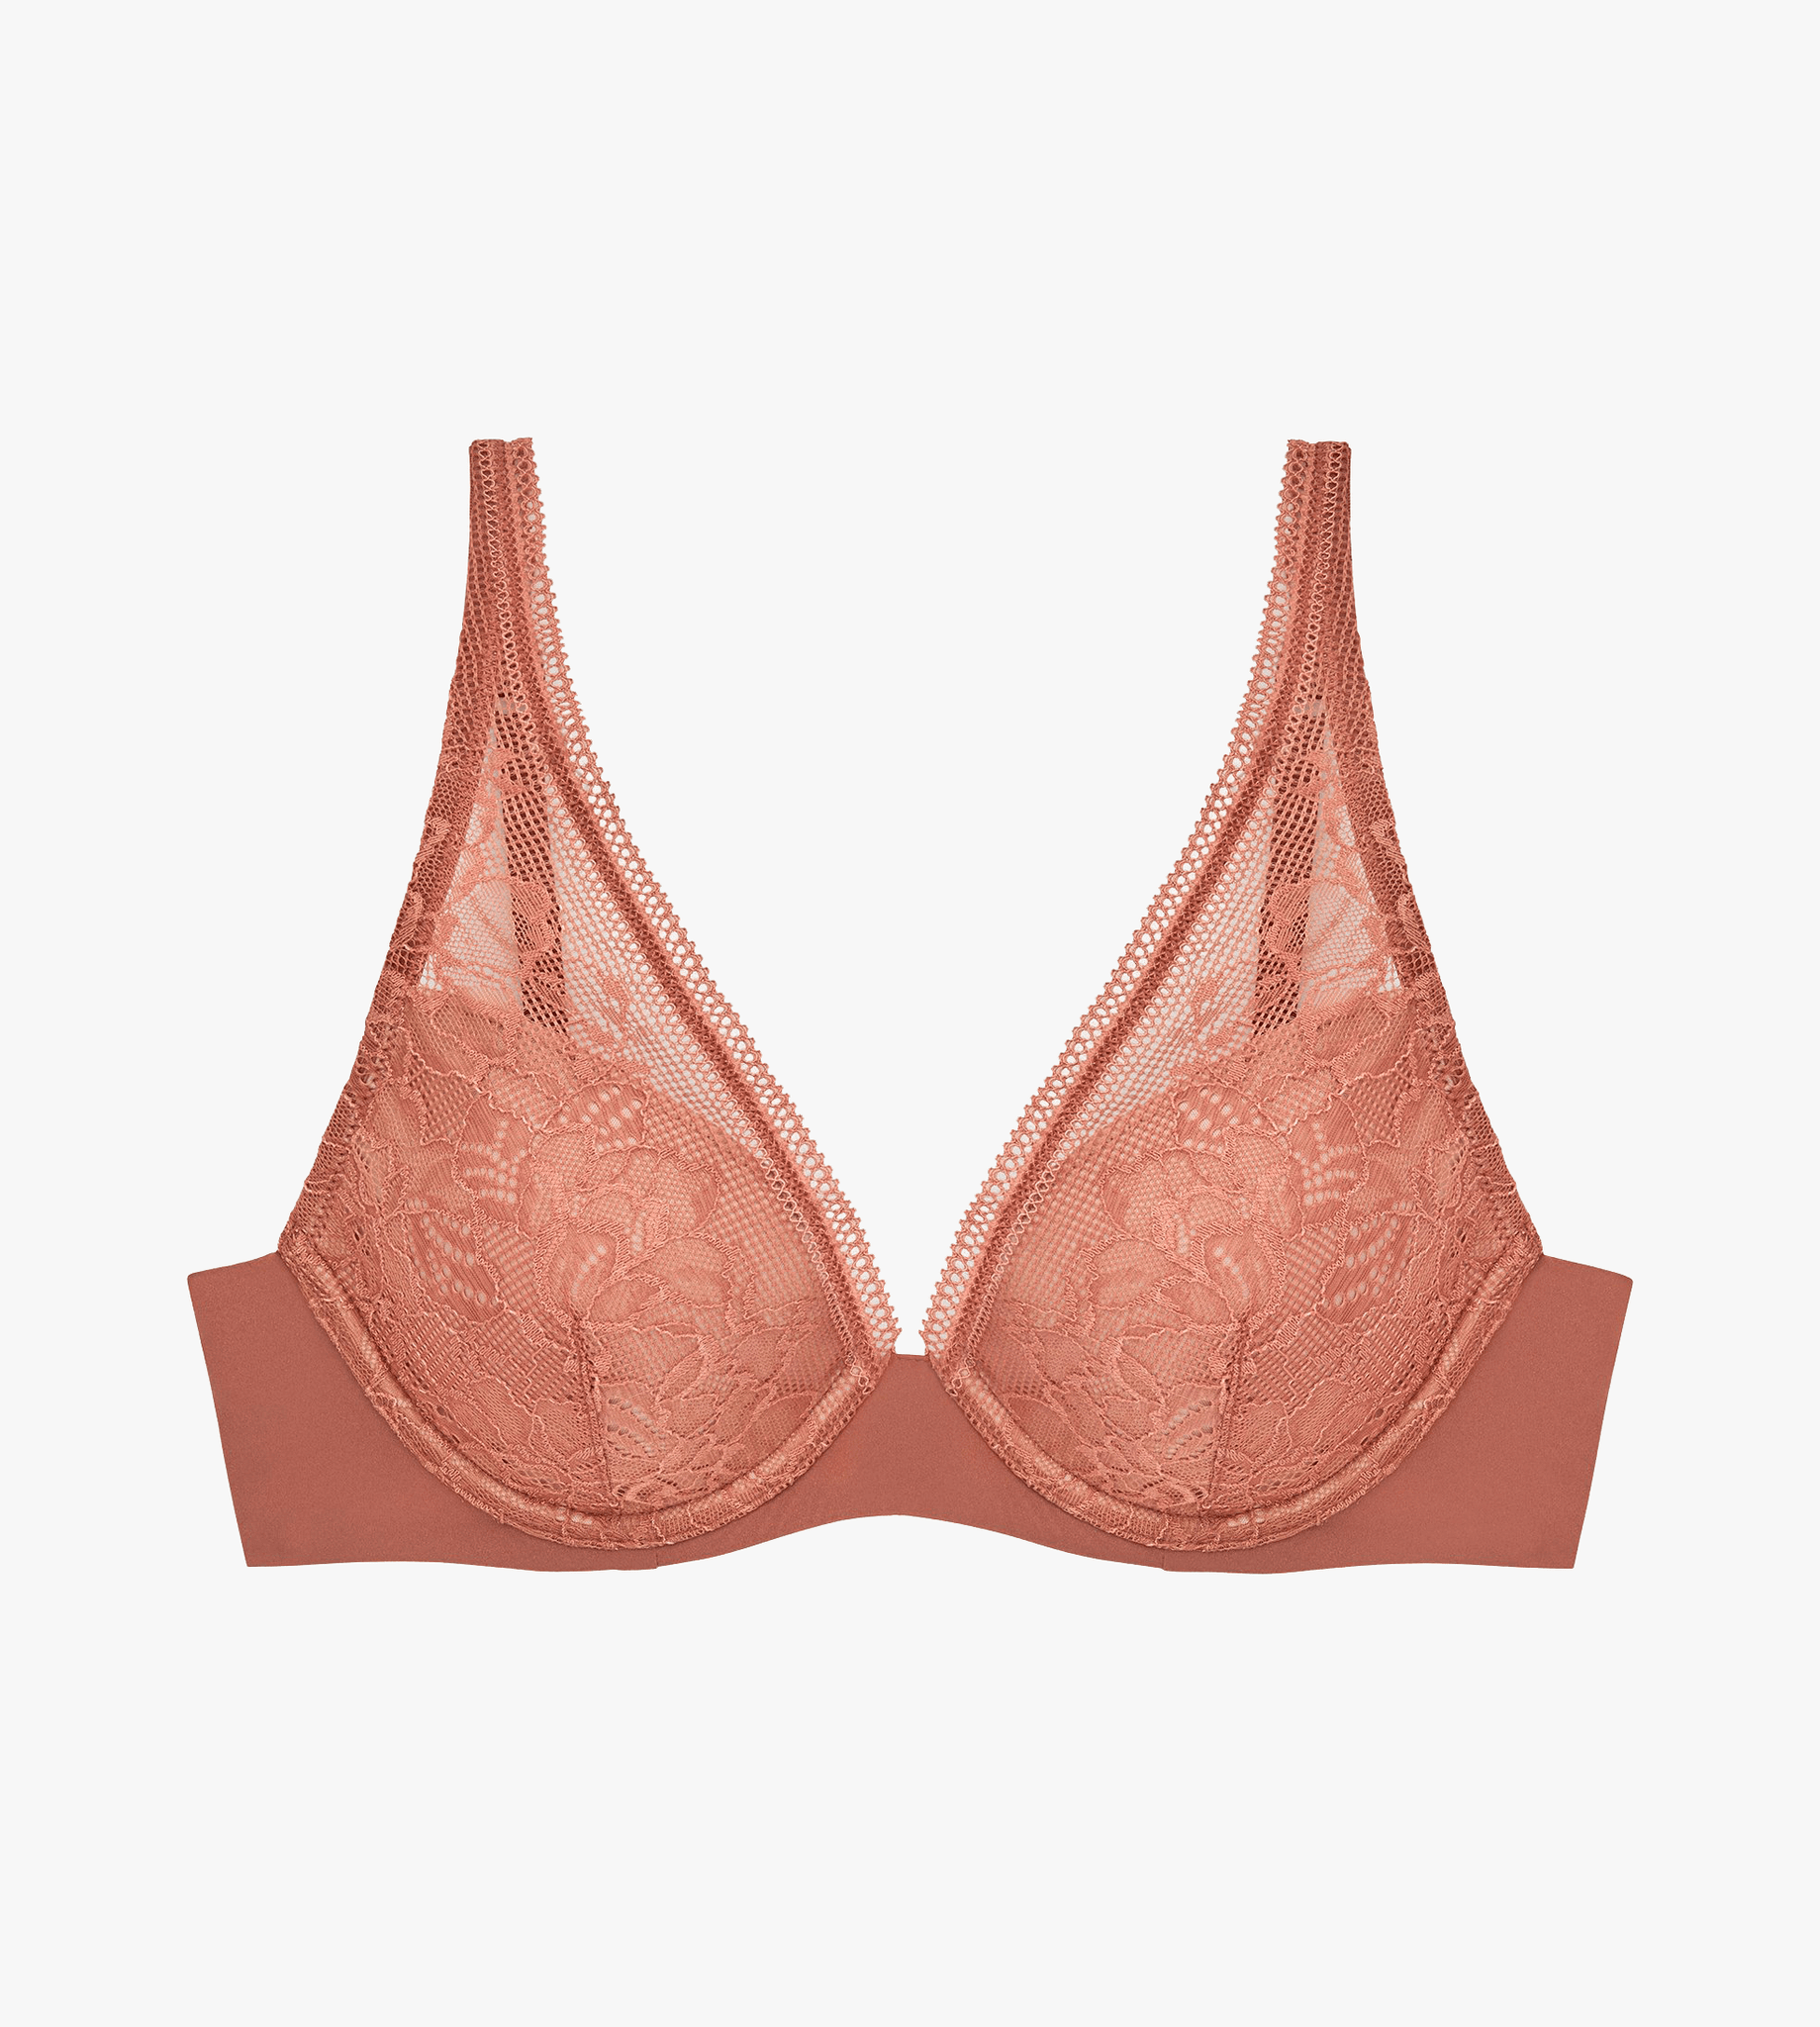 The Lace Plunge Bra